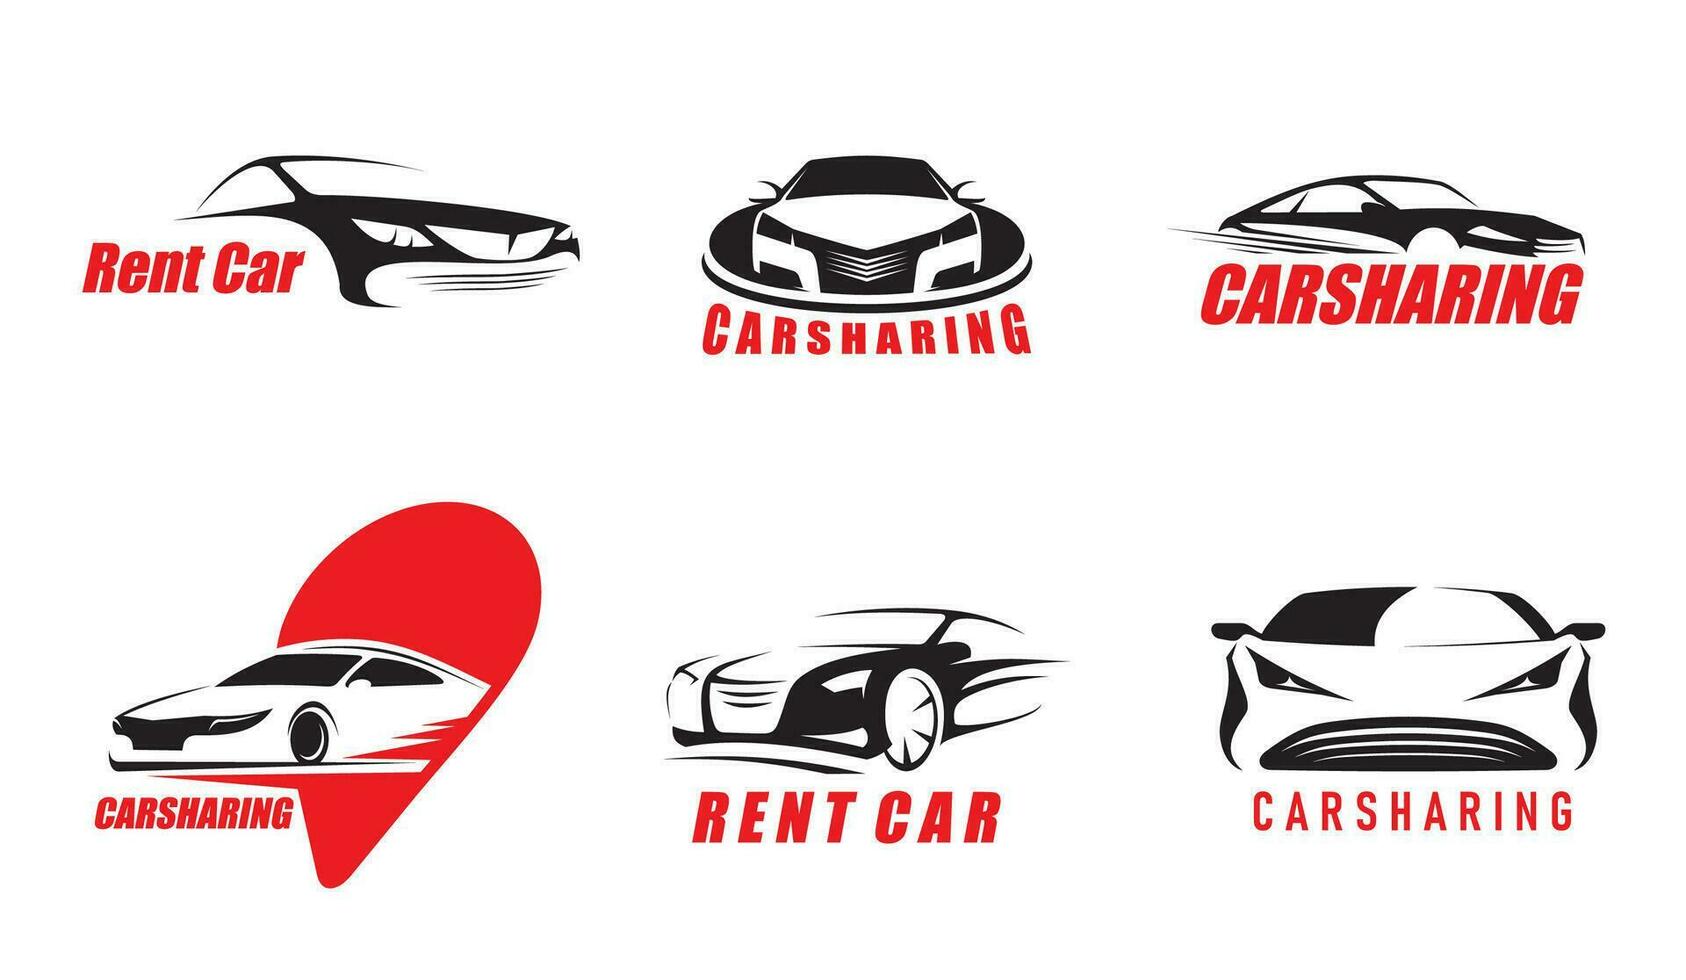 Car renting and sharing service icons or symbols vector